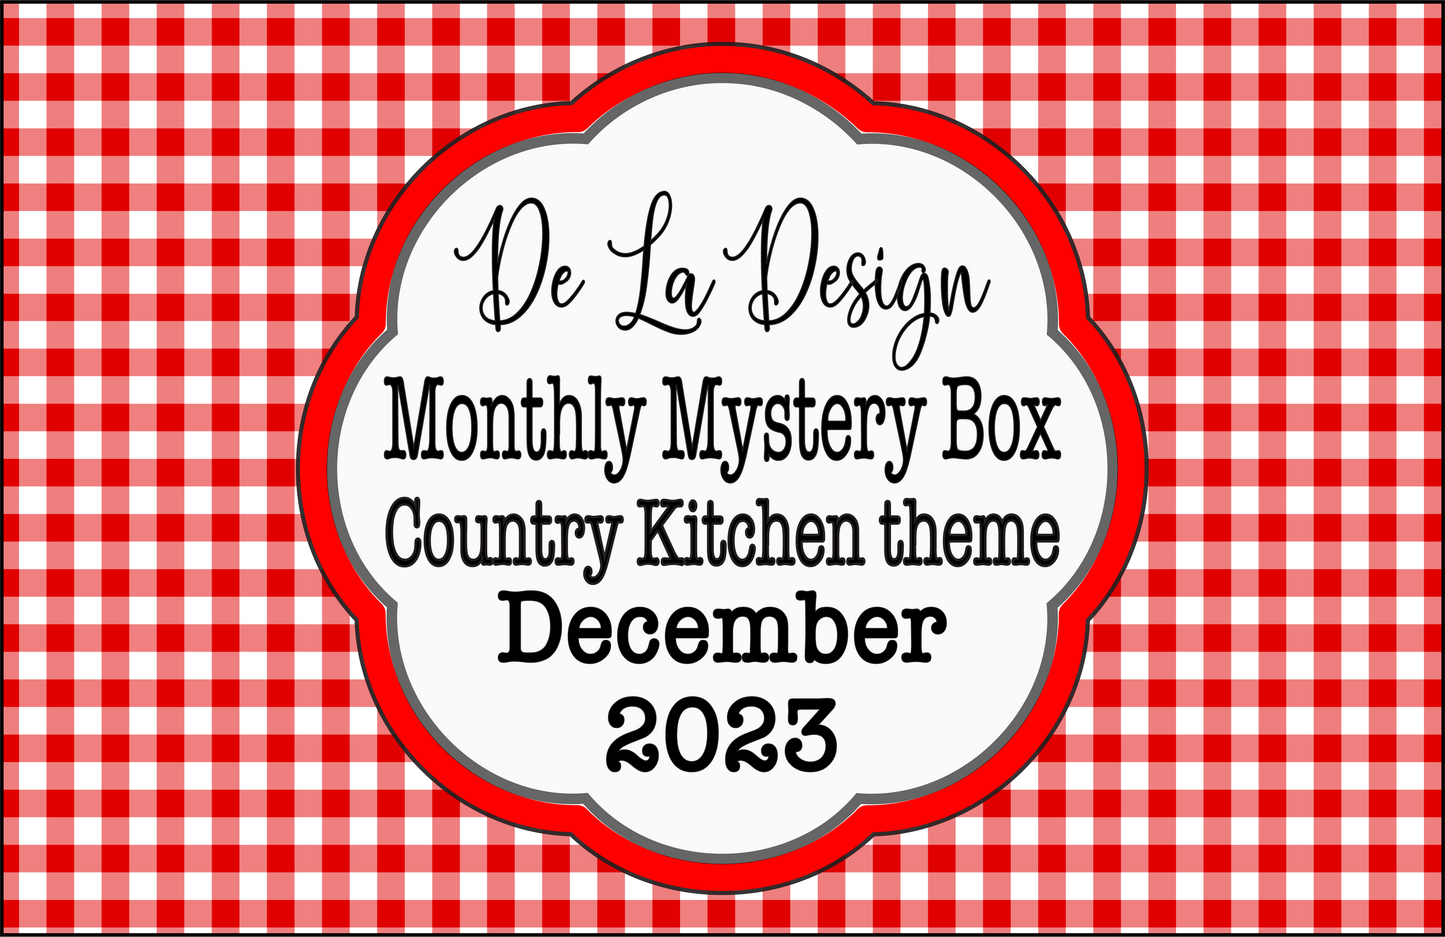 Monthly Mystery Box - December 2023 - Country Kitchen themed